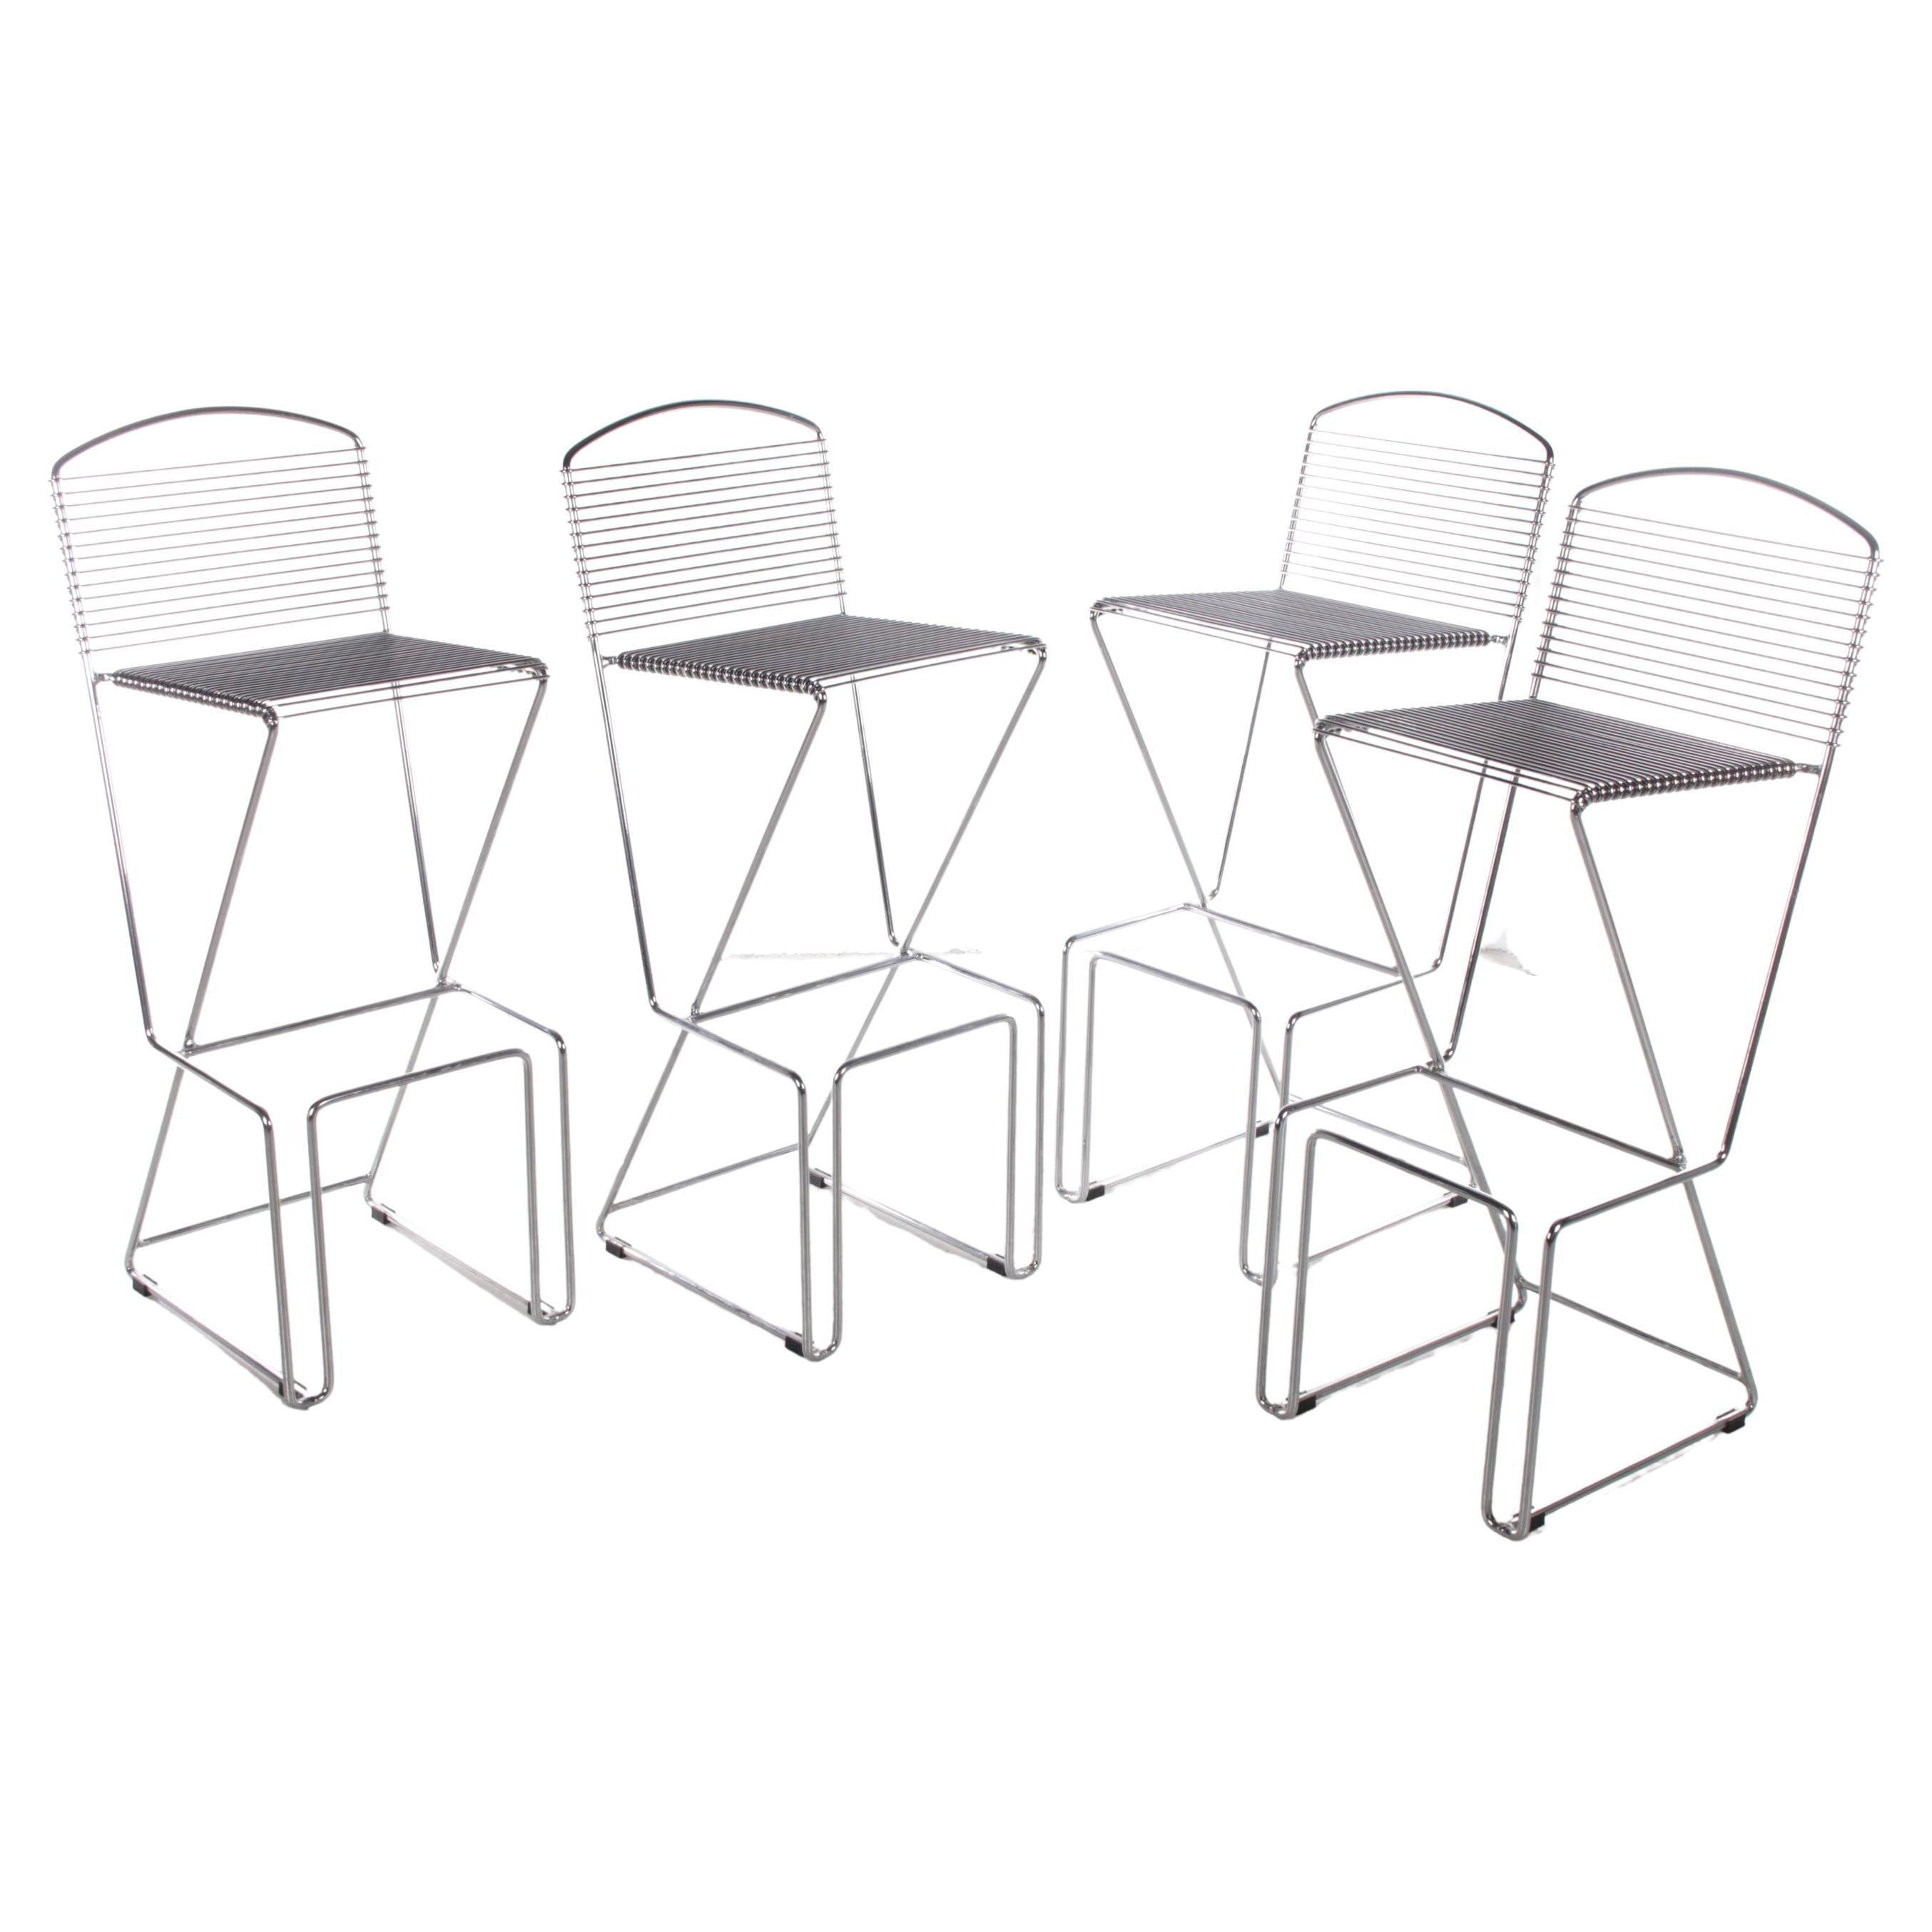 Set of 4 Bar Stools by Till Behrens by Schlubach, 1980